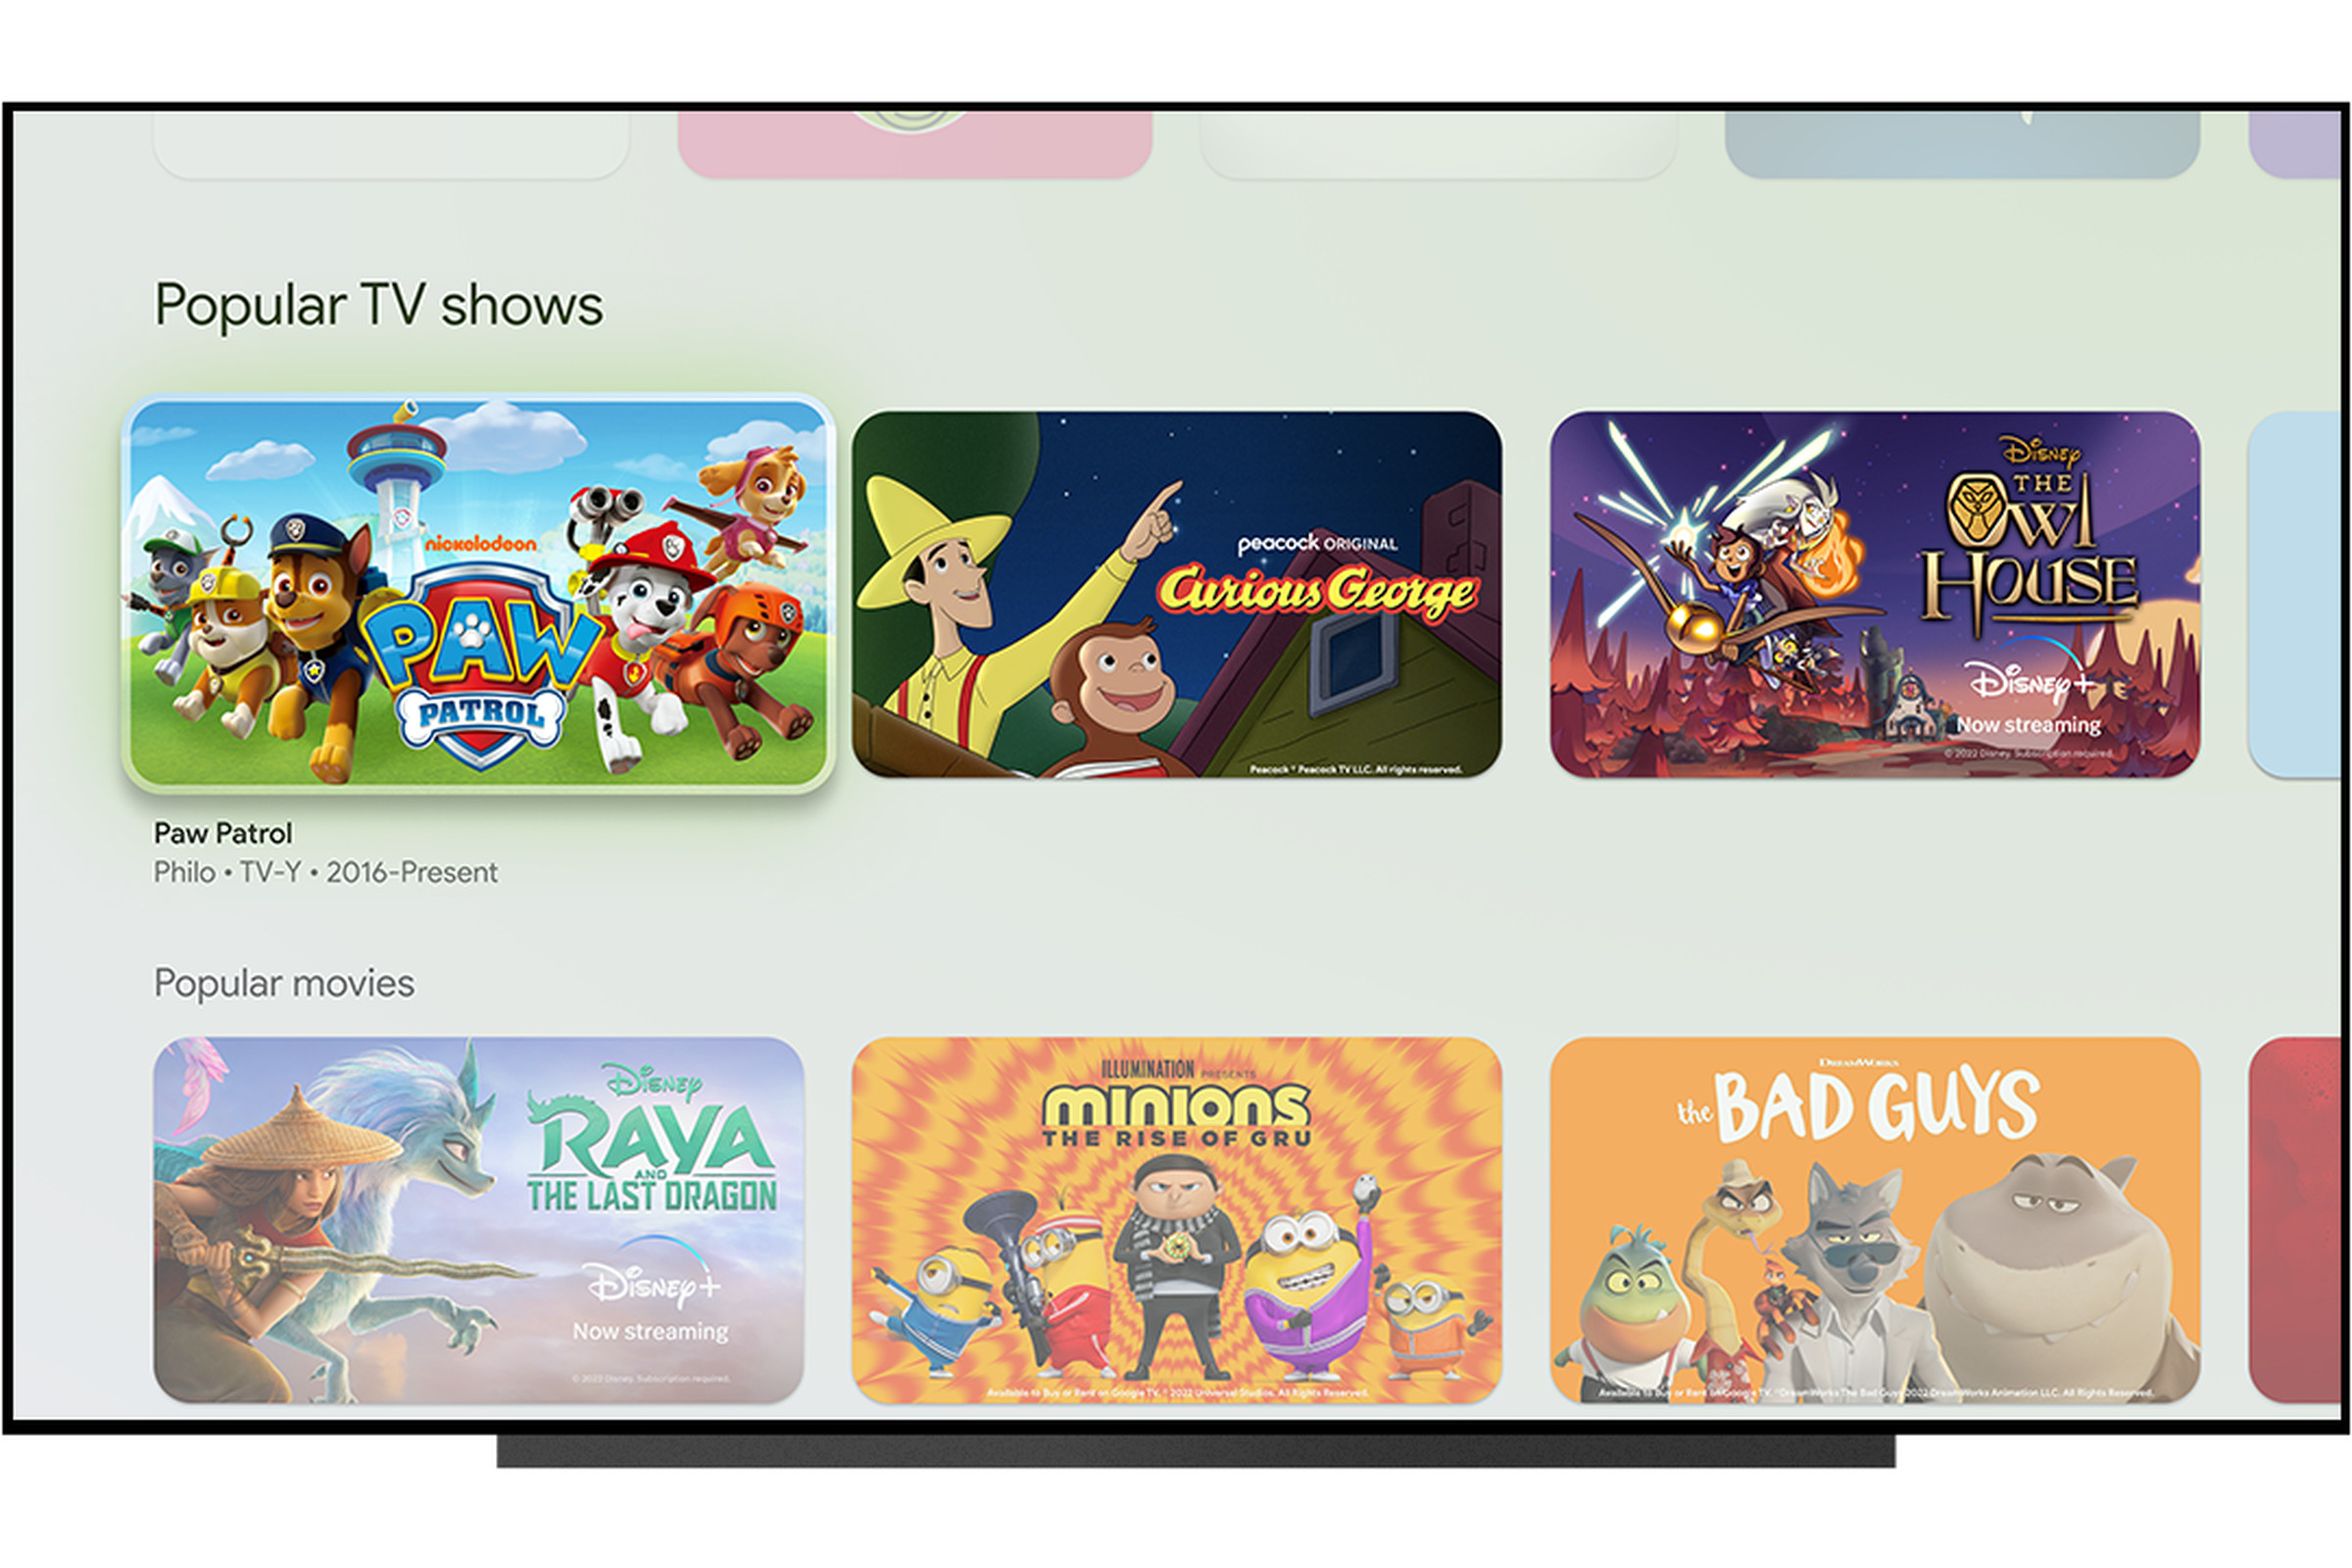 An image of the new Google TV kids profile home screen with content recommendations.